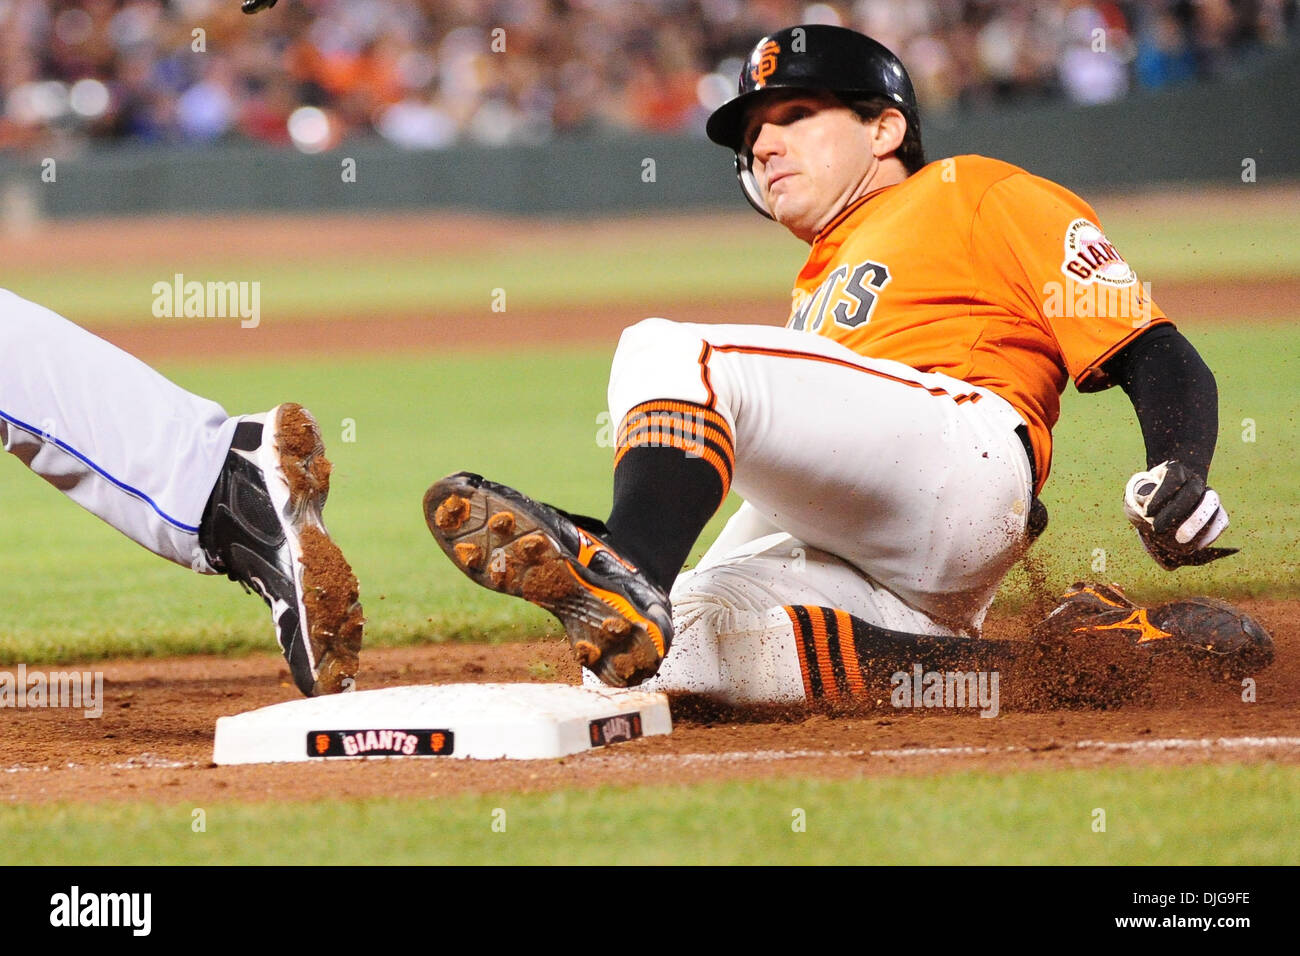 San Francisco, CA: San Francisco Giants pitcher Barry Zito (75) is out at first base. The San Francisco Giants won the game 1-0. (Credit Image: © Charles Herskowitz/Southcreek Global/ZUMApress.com) Stock Photo